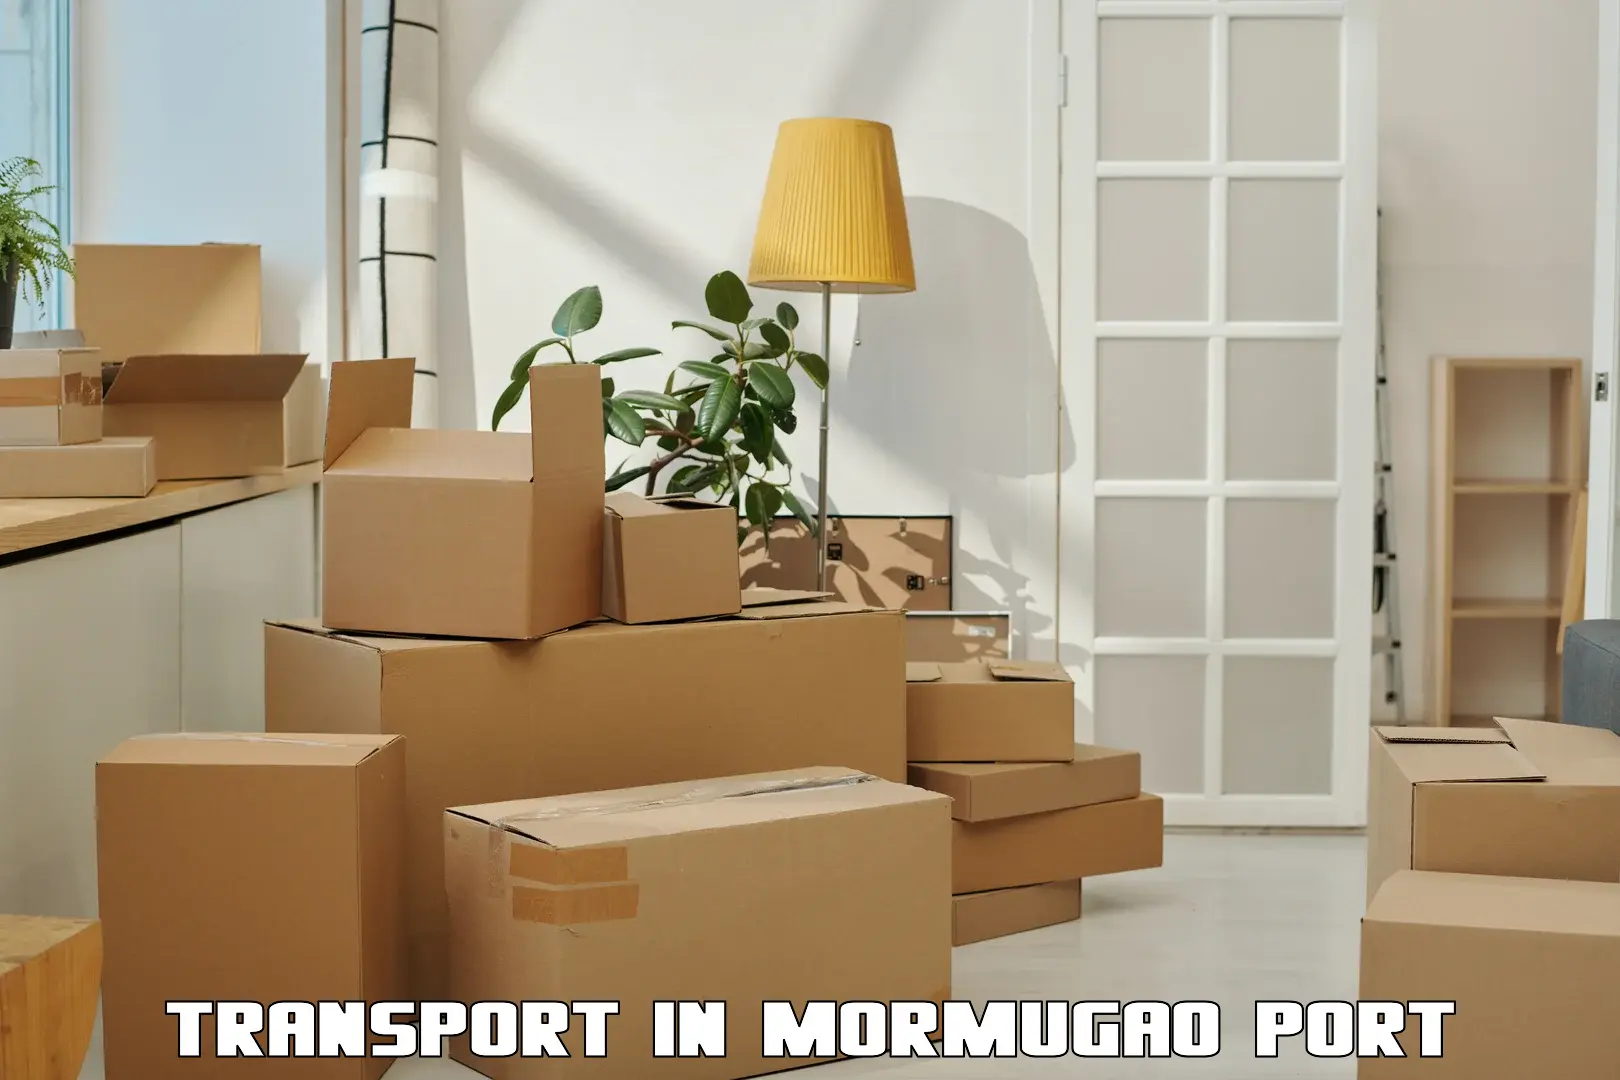 Air freight transport services in Mormugao Port